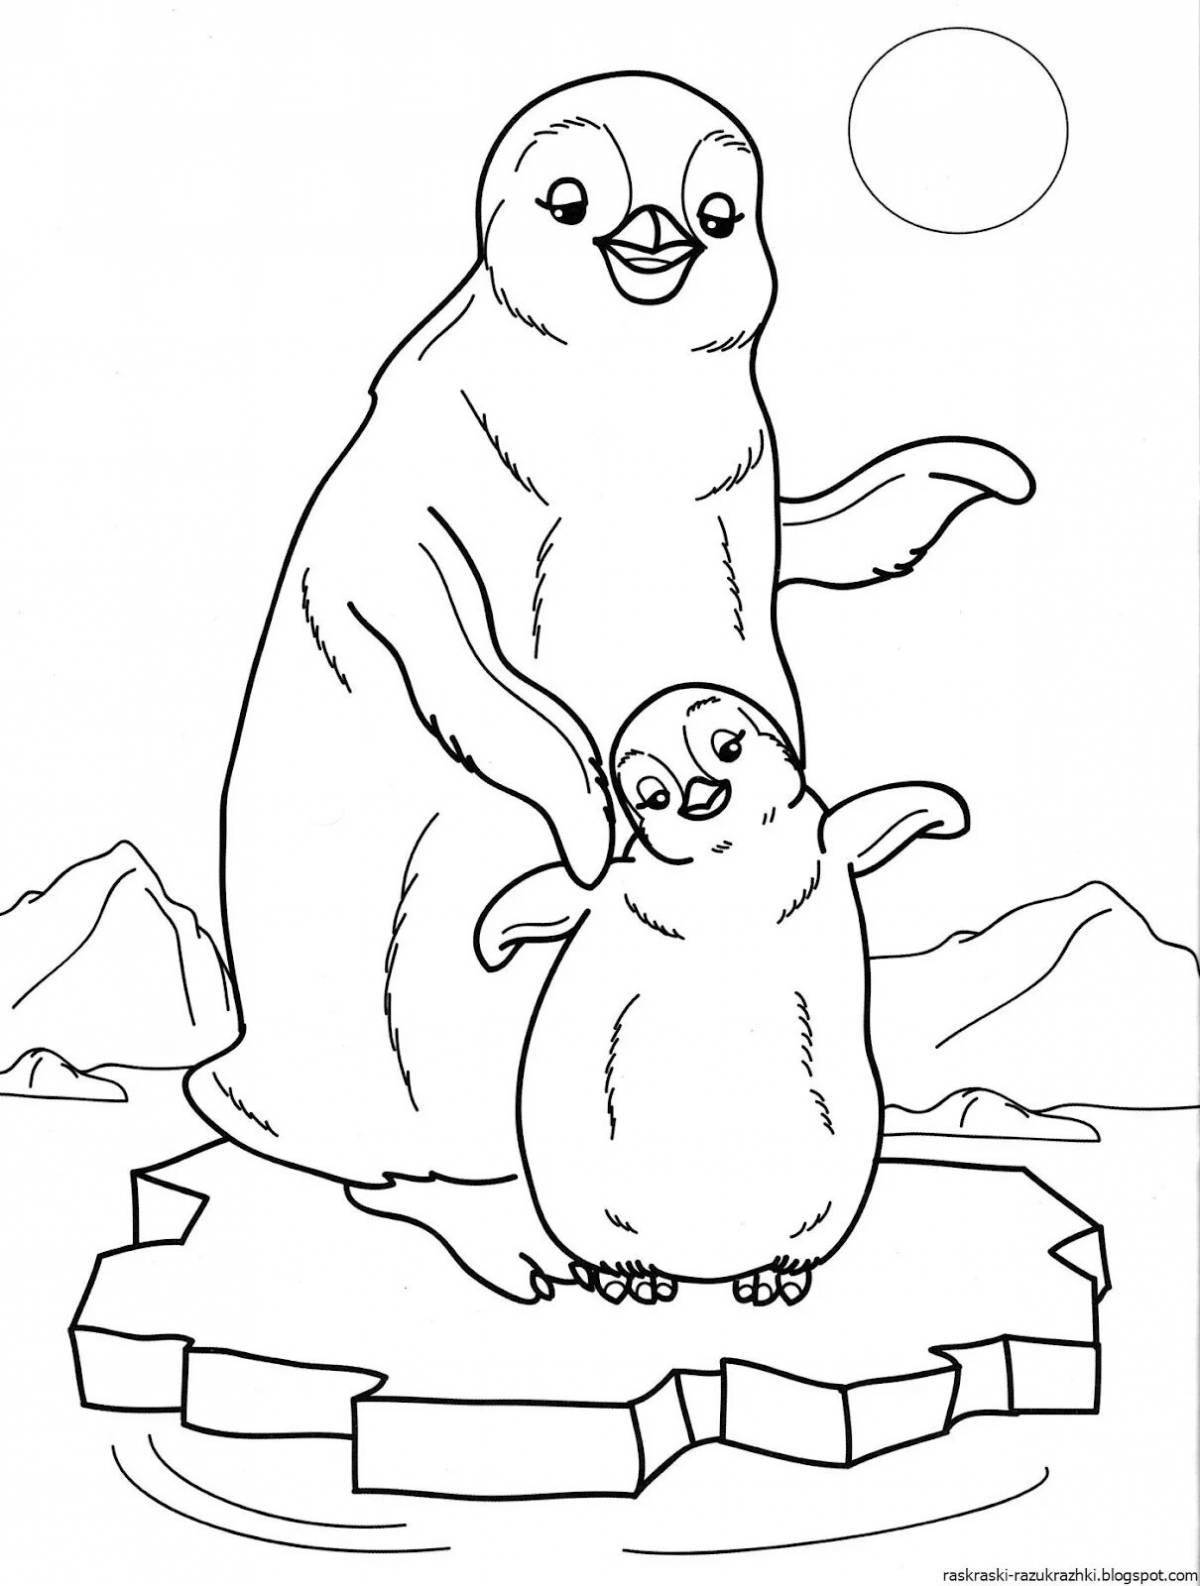 Amazing north pole coloring book for kids